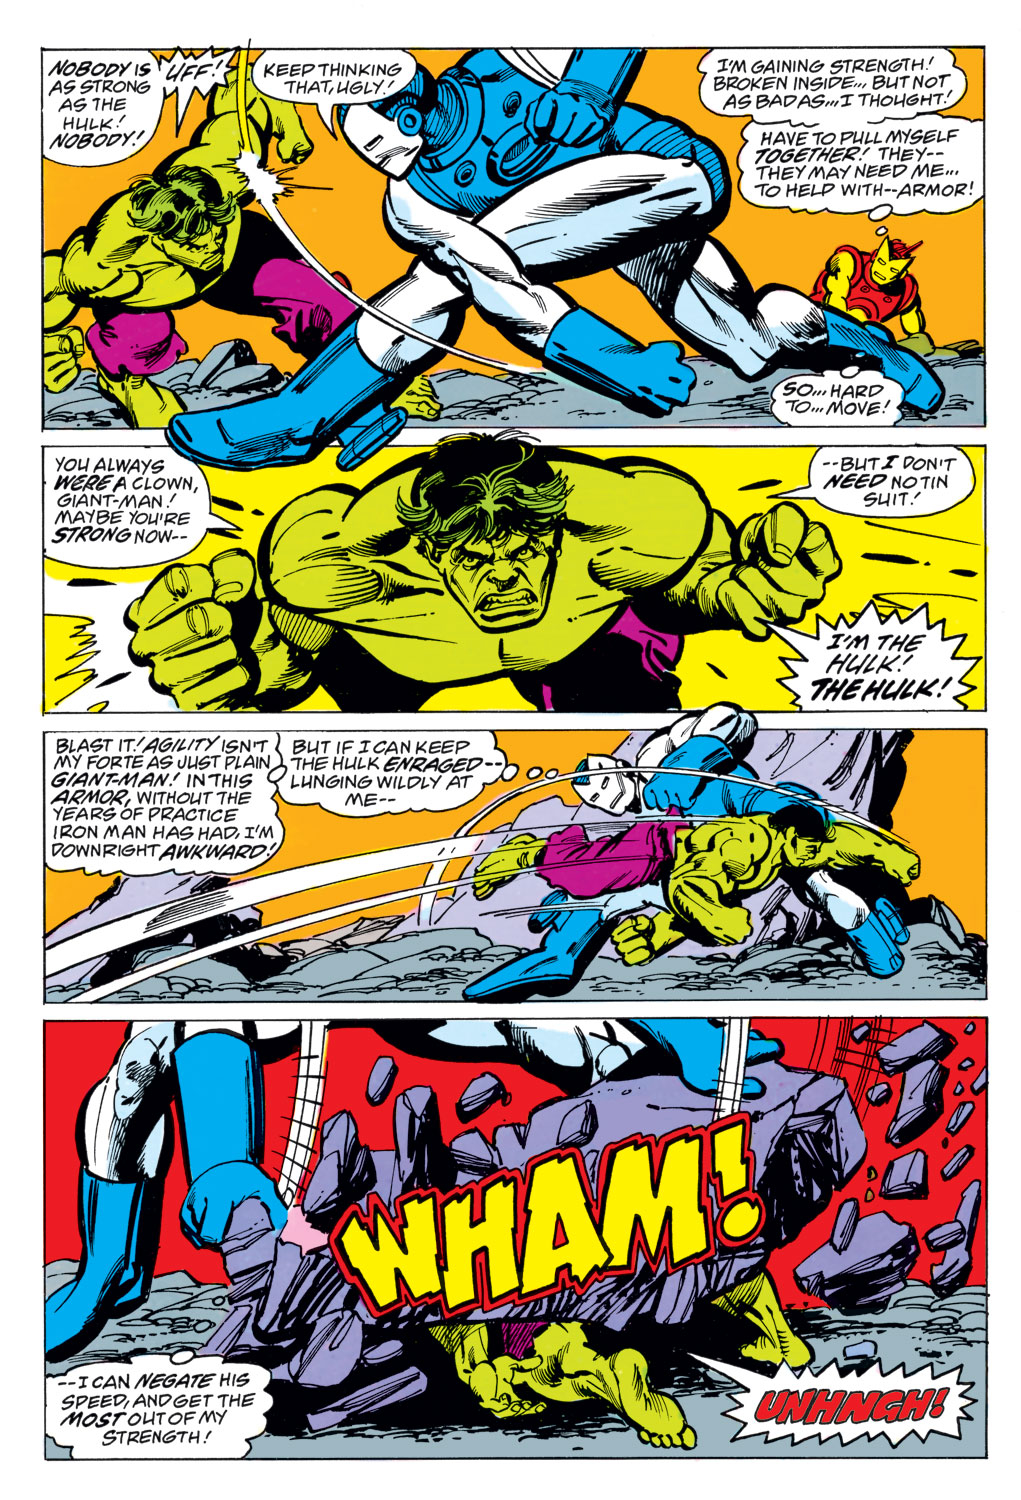 What If? (1977) issue 3 - The Avengers had never been - Page 26